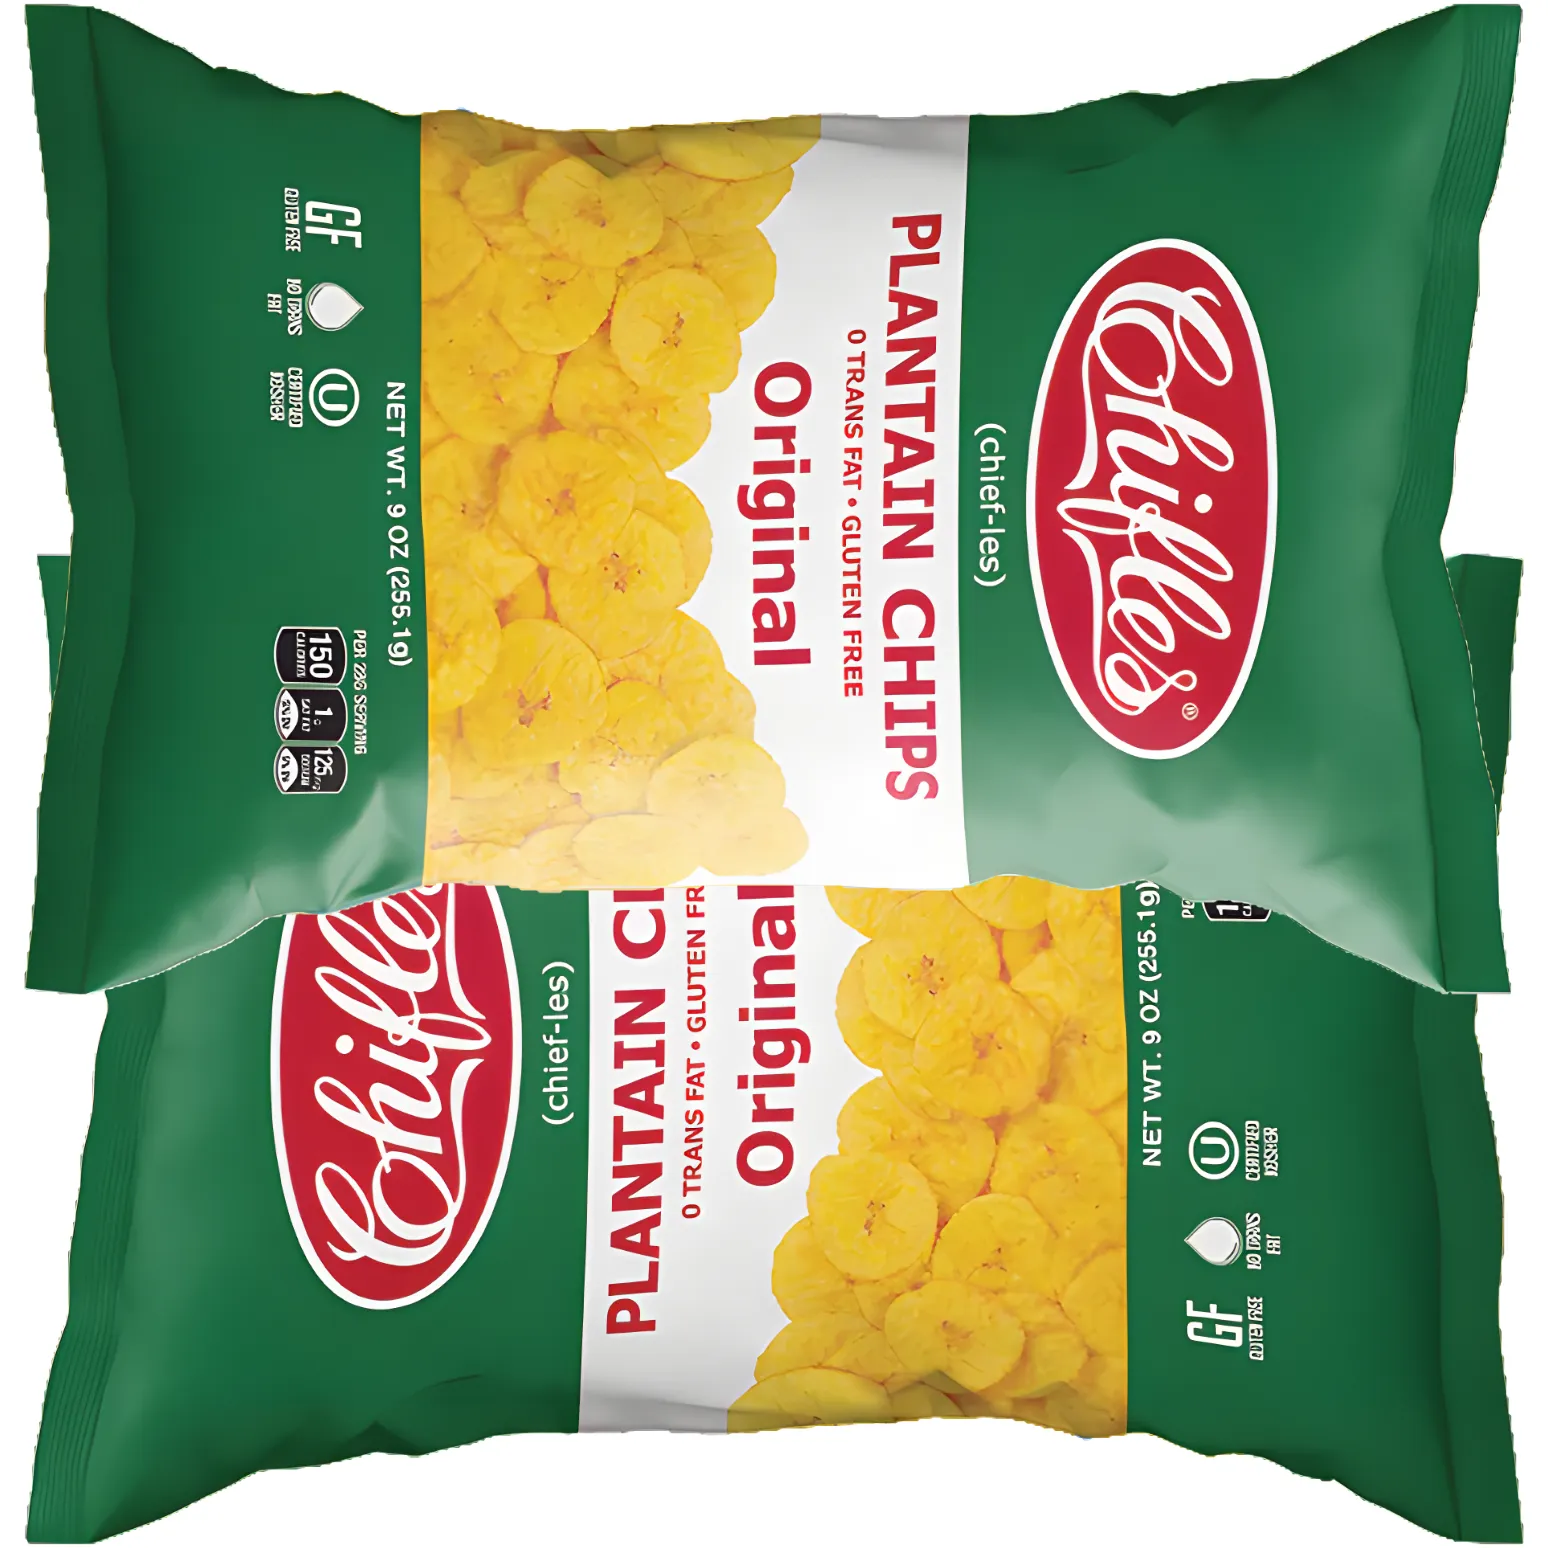 Free Bag Of Chifles Plantain Chips